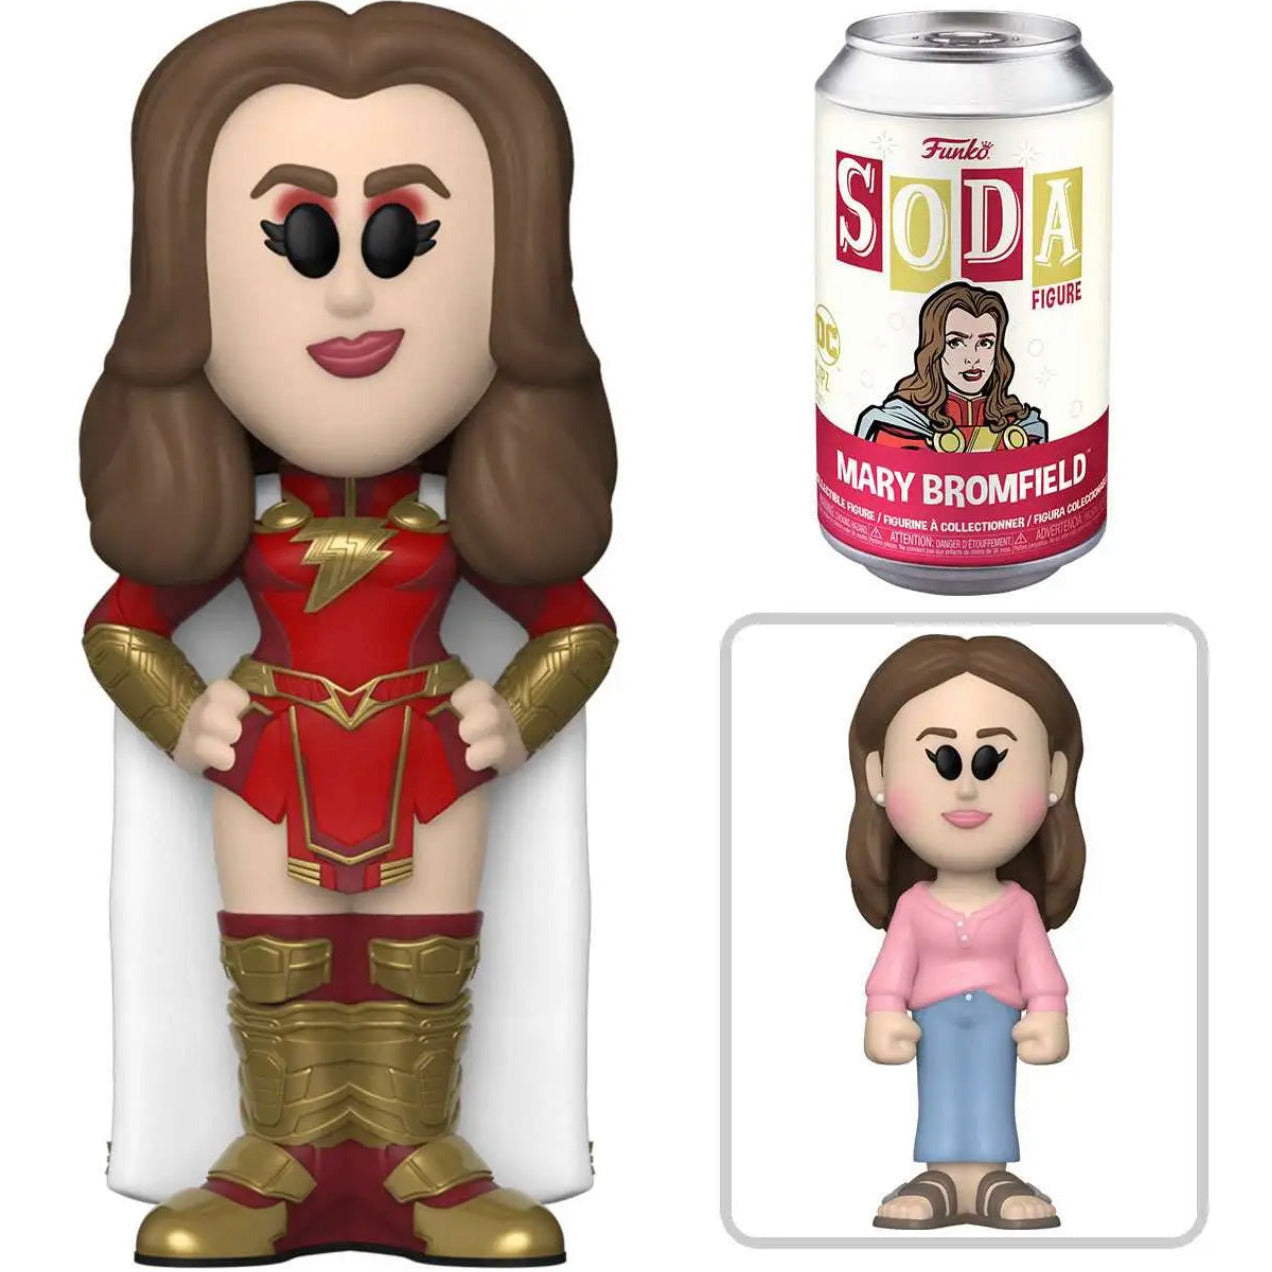 SHAZAM 2 FURY OF THE GODS MARY BROMFIELD VINYL FUNKO SODA FIGURE W/ 1 IN 6 CHANCE AT CHASE IN STOCK